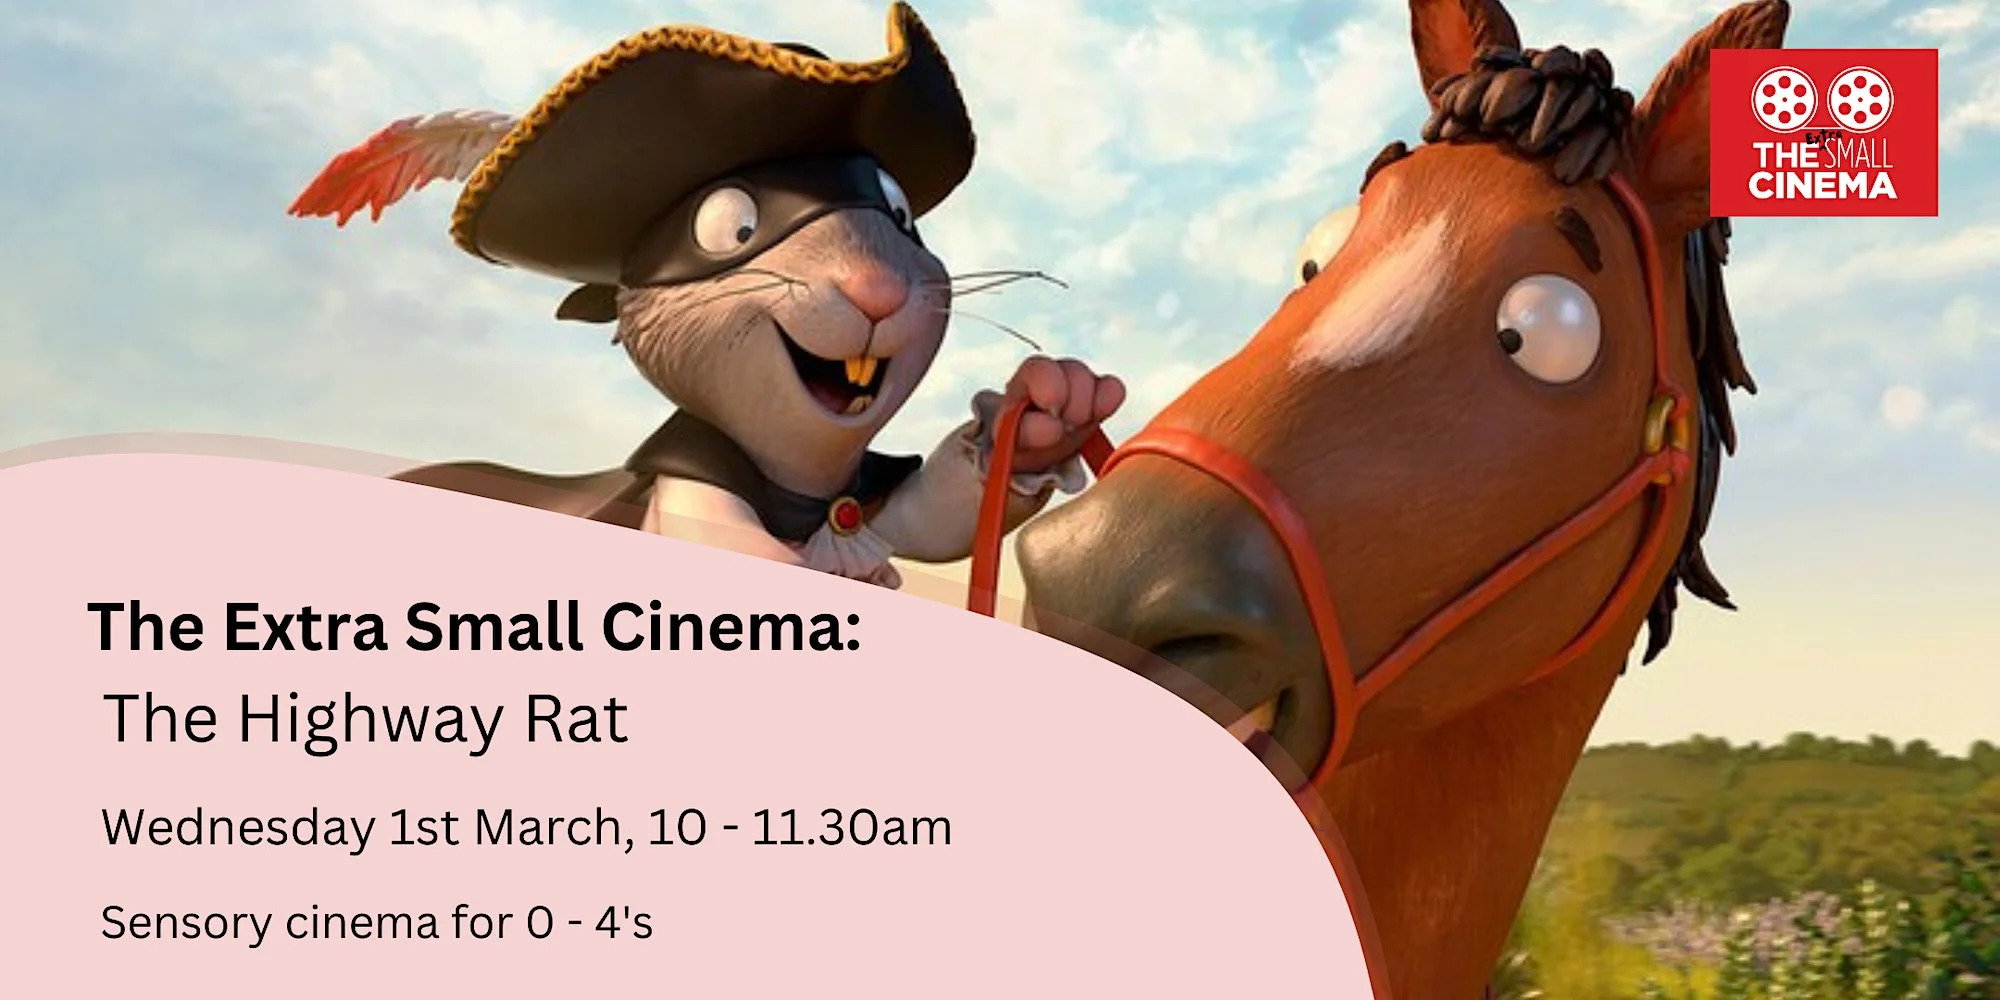 Cartoon image of a mouse dressed as a musketeer rides a brown horse. Text reads, The extra small cinema, The Highway rat, Wednesday 1st March, 10 - 11:30am, Sensory cinema for 0 - 4's.